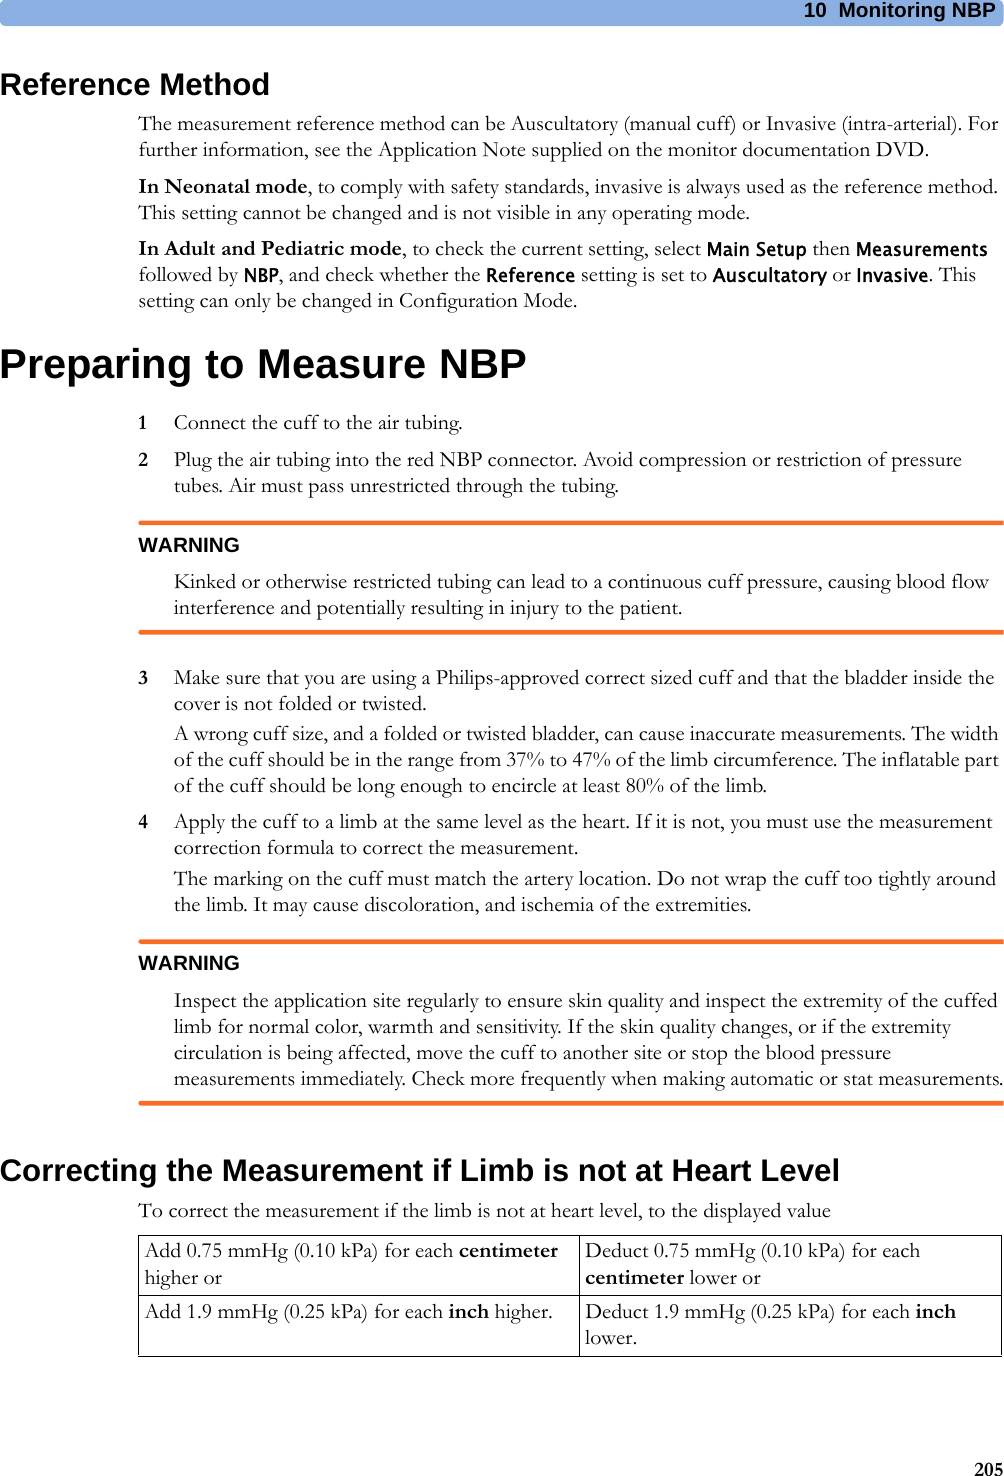 10 Monitoring NBP205Reference MethodThe measurement reference method can be Auscultatory (manual cuff) or Invasive (intra-arterial). For further information, see the Application Note supplied on the monitor documentation DVD.In Neonatal mode, to comply with safety standards, invasive is always used as the reference method. This setting cannot be changed and is not visible in any operating mode.In Adult and Pediatric mode, to check the current setting, select Main Setup then Measurements followed by NBP, and check whether the Reference setting is set to Auscultatory or Invasive. This setting can only be changed in Configuration Mode.Preparing to Measure NBP1Connect the cuff to the air tubing.2Plug the air tubing into the red NBP connector. Avoid compression or restriction of pressure tubes. Air must pass unrestricted through the tubing.WARNINGKinked or otherwise restricted tubing can lead to a continuous cuff pressure, causing blood flow interference and potentially resulting in injury to the patient.3Make sure that you are using a Philips-approved correct sized cuff and that the bladder inside the cover is not folded or twisted.A wrong cuff size, and a folded or twisted bladder, can cause inaccurate measurements. The width of the cuff should be in the range from 37% to 47% of the limb circumference. The inflatable part of the cuff should be long enough to encircle at least 80% of the limb.4Apply the cuff to a limb at the same level as the heart. If it is not, you must use the measurement correction formula to correct the measurement.The marking on the cuff must match the artery location. Do not wrap the cuff too tightly around the limb. It may cause discoloration, and ischemia of the extremities.WARNINGInspect the application site regularly to ensure skin quality and inspect the extremity of the cuffed limb for normal color, warmth and sensitivity. If the skin quality changes, or if the extremity circulation is being affected, move the cuff to another site or stop the blood pressure measurements immediately. Check more frequently when making automatic or stat measurements.Correcting the Measurement if Limb is not at Heart LevelTo correct the measurement if the limb is not at heart level, to the displayed valueAdd 0.75 mmHg (0.10 kPa) for each centimeter higher orDeduct 0.75 mmHg (0.10 kPa) for each centimeter lower orAdd 1.9 mmHg (0.25 kPa) for each inch higher. Deduct 1.9 mmHg (0.25 kPa) for each inch lower.